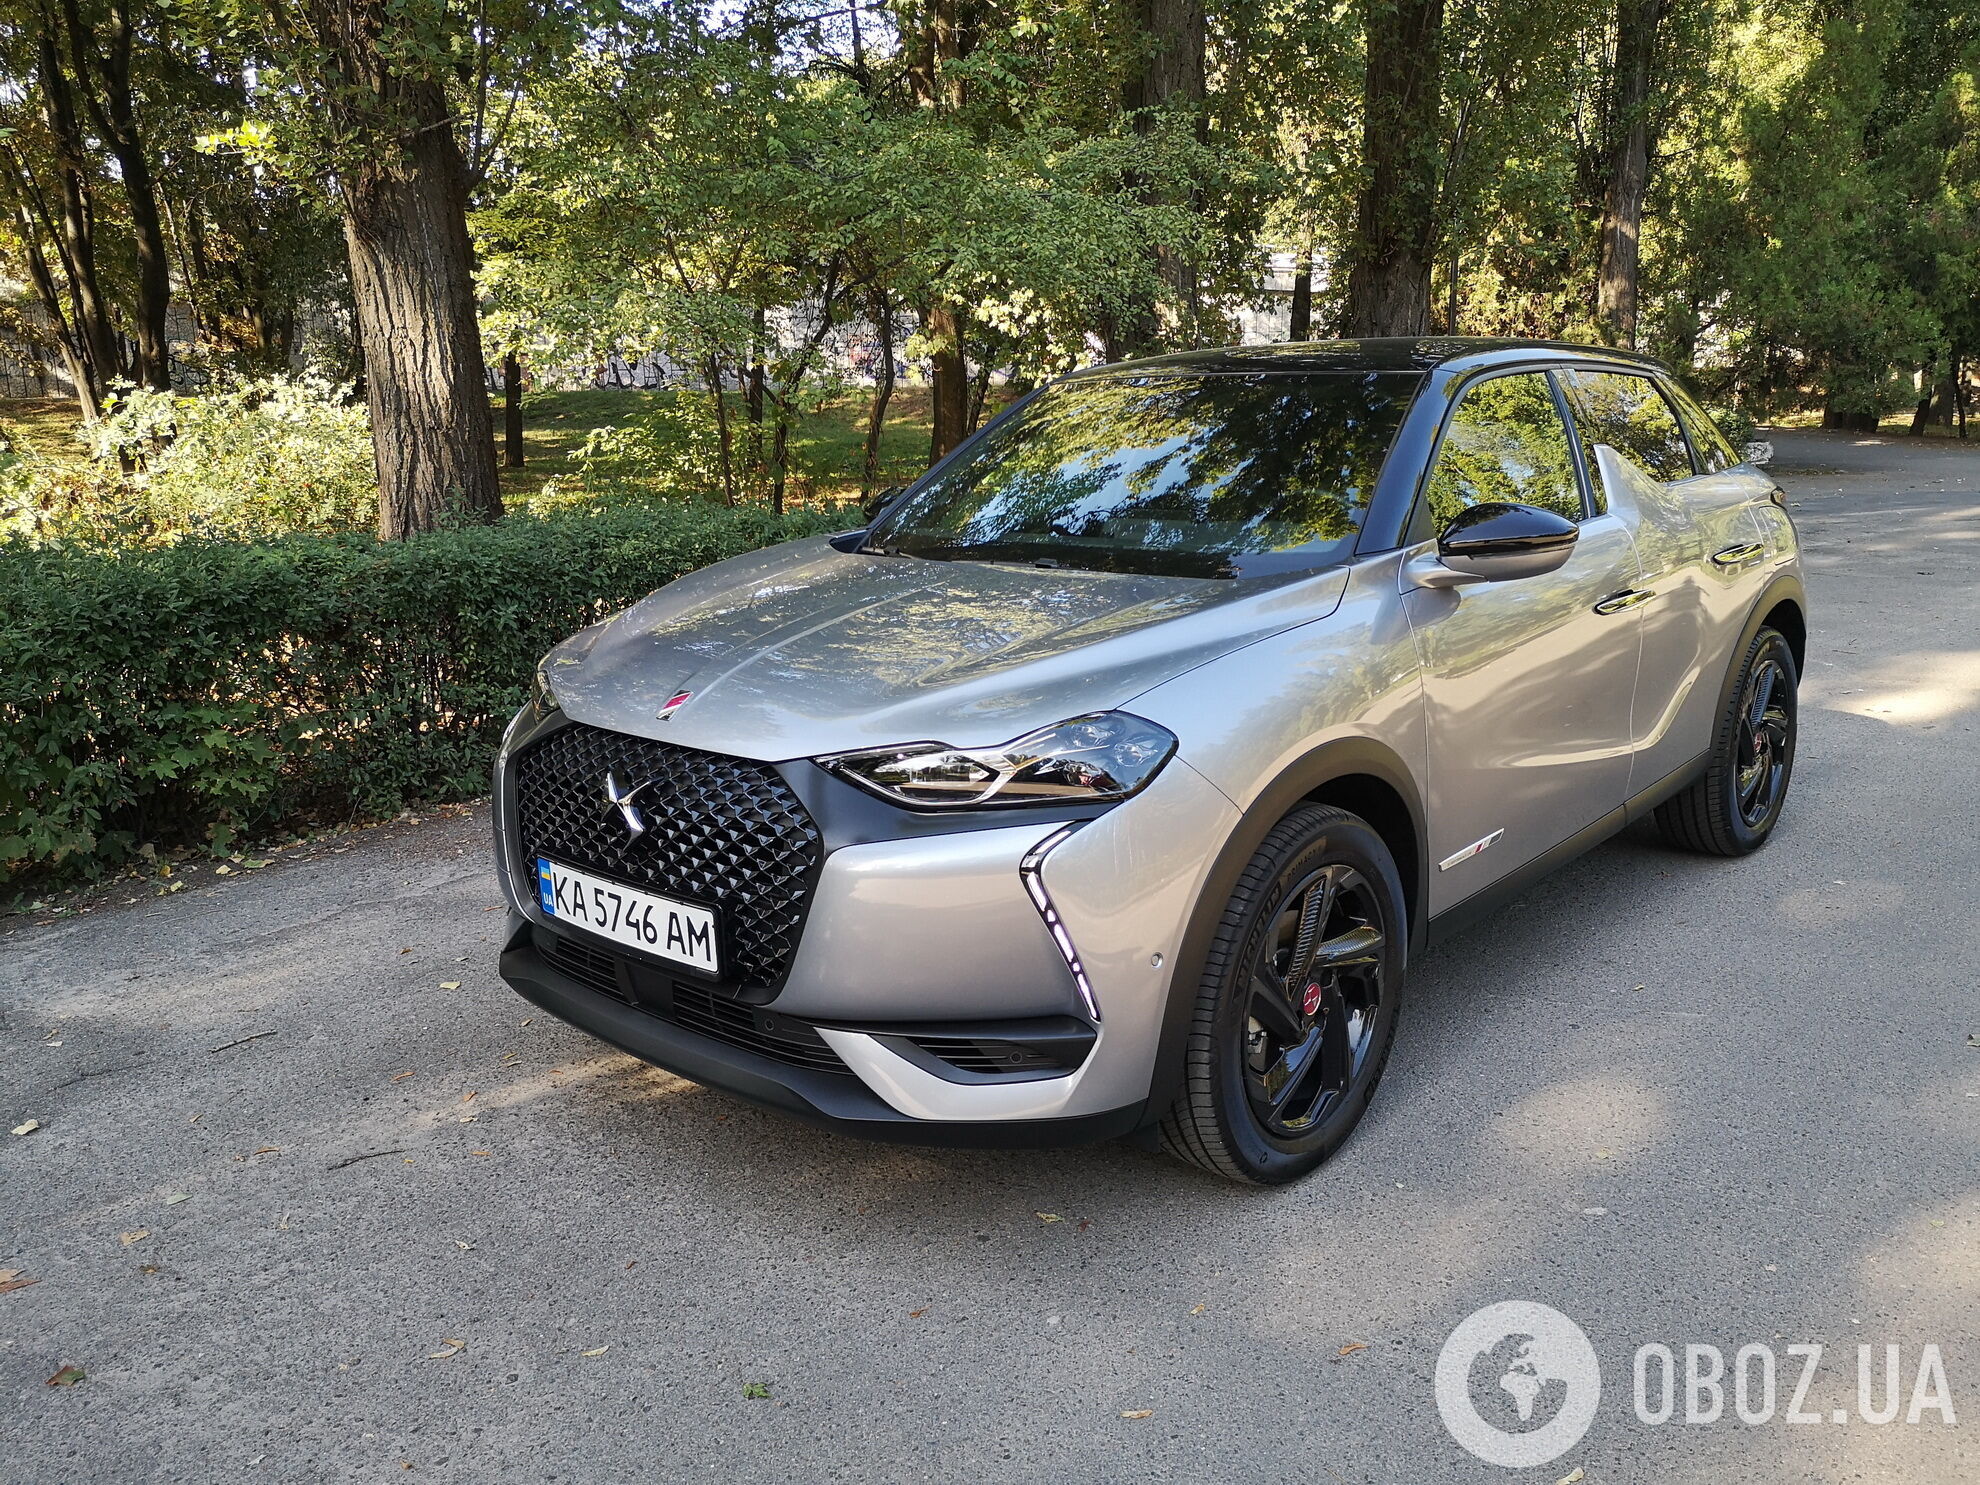 DS 3 Crossback. Фото: